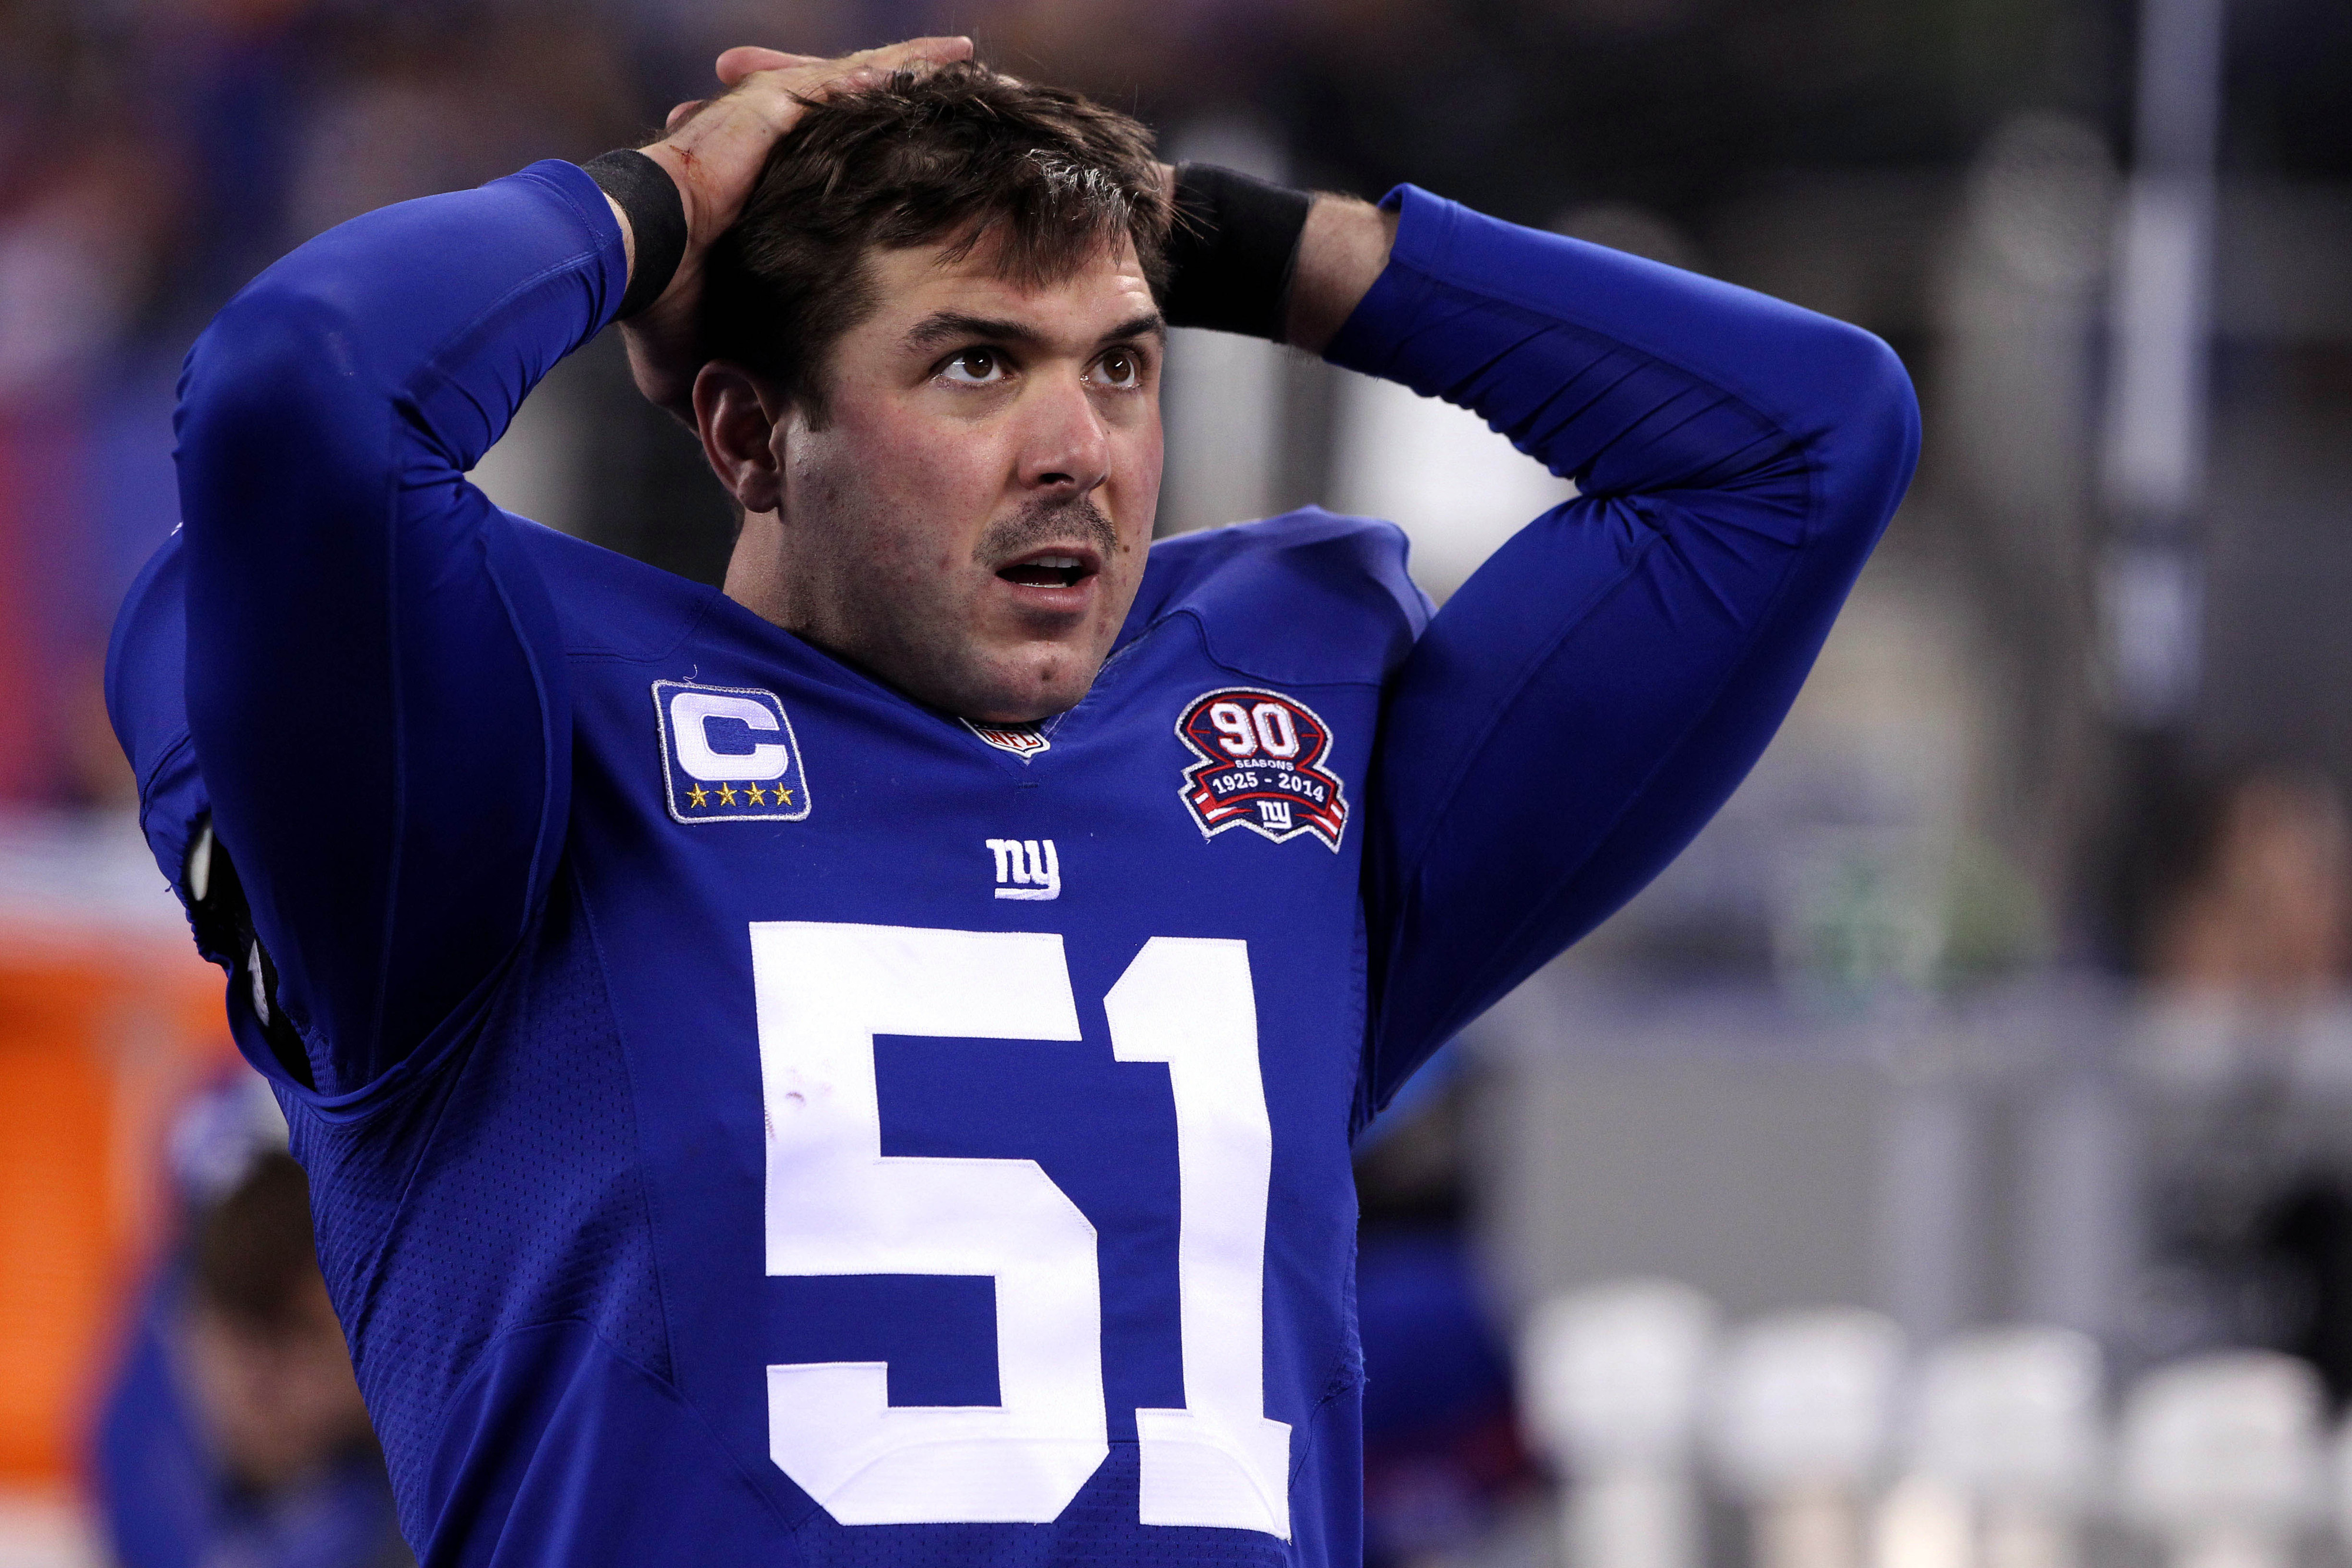 Zak DeOssie's reaction to Monday's loss mirors that of Giants fans.